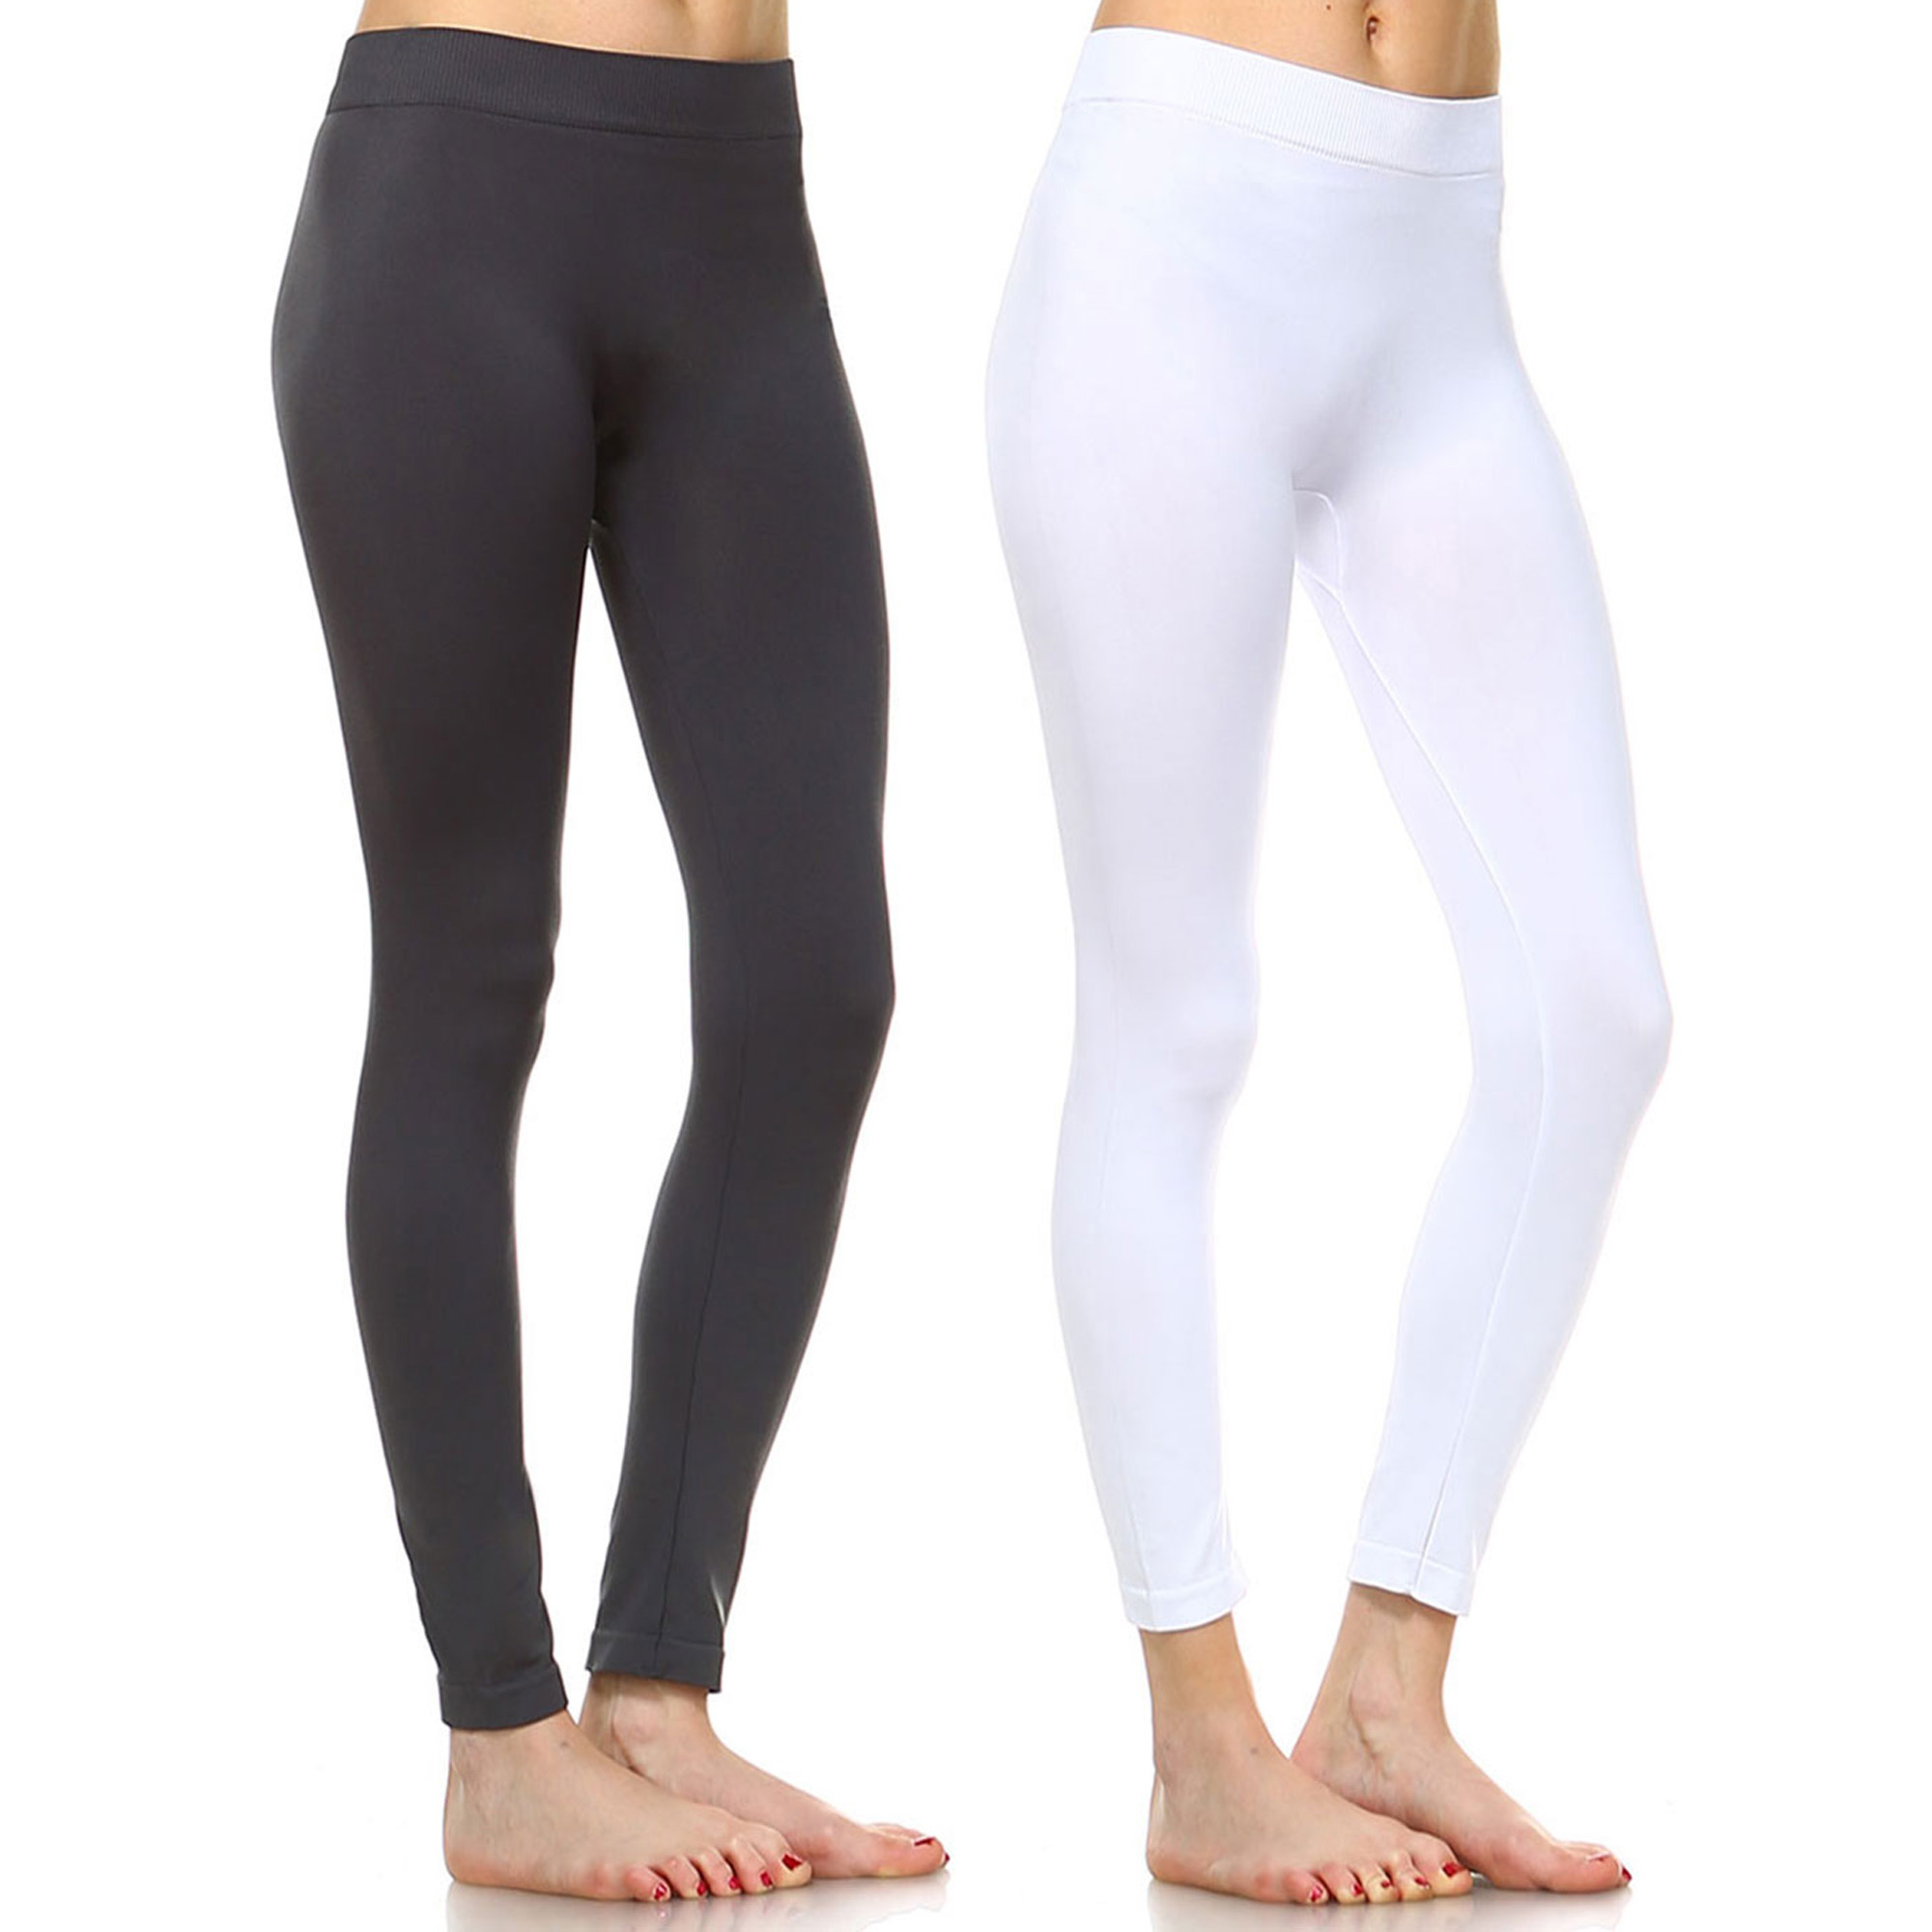 White Mark Women's Pack Of 2 Solid Color Leggings - Charcoal, White, One Size - Missy